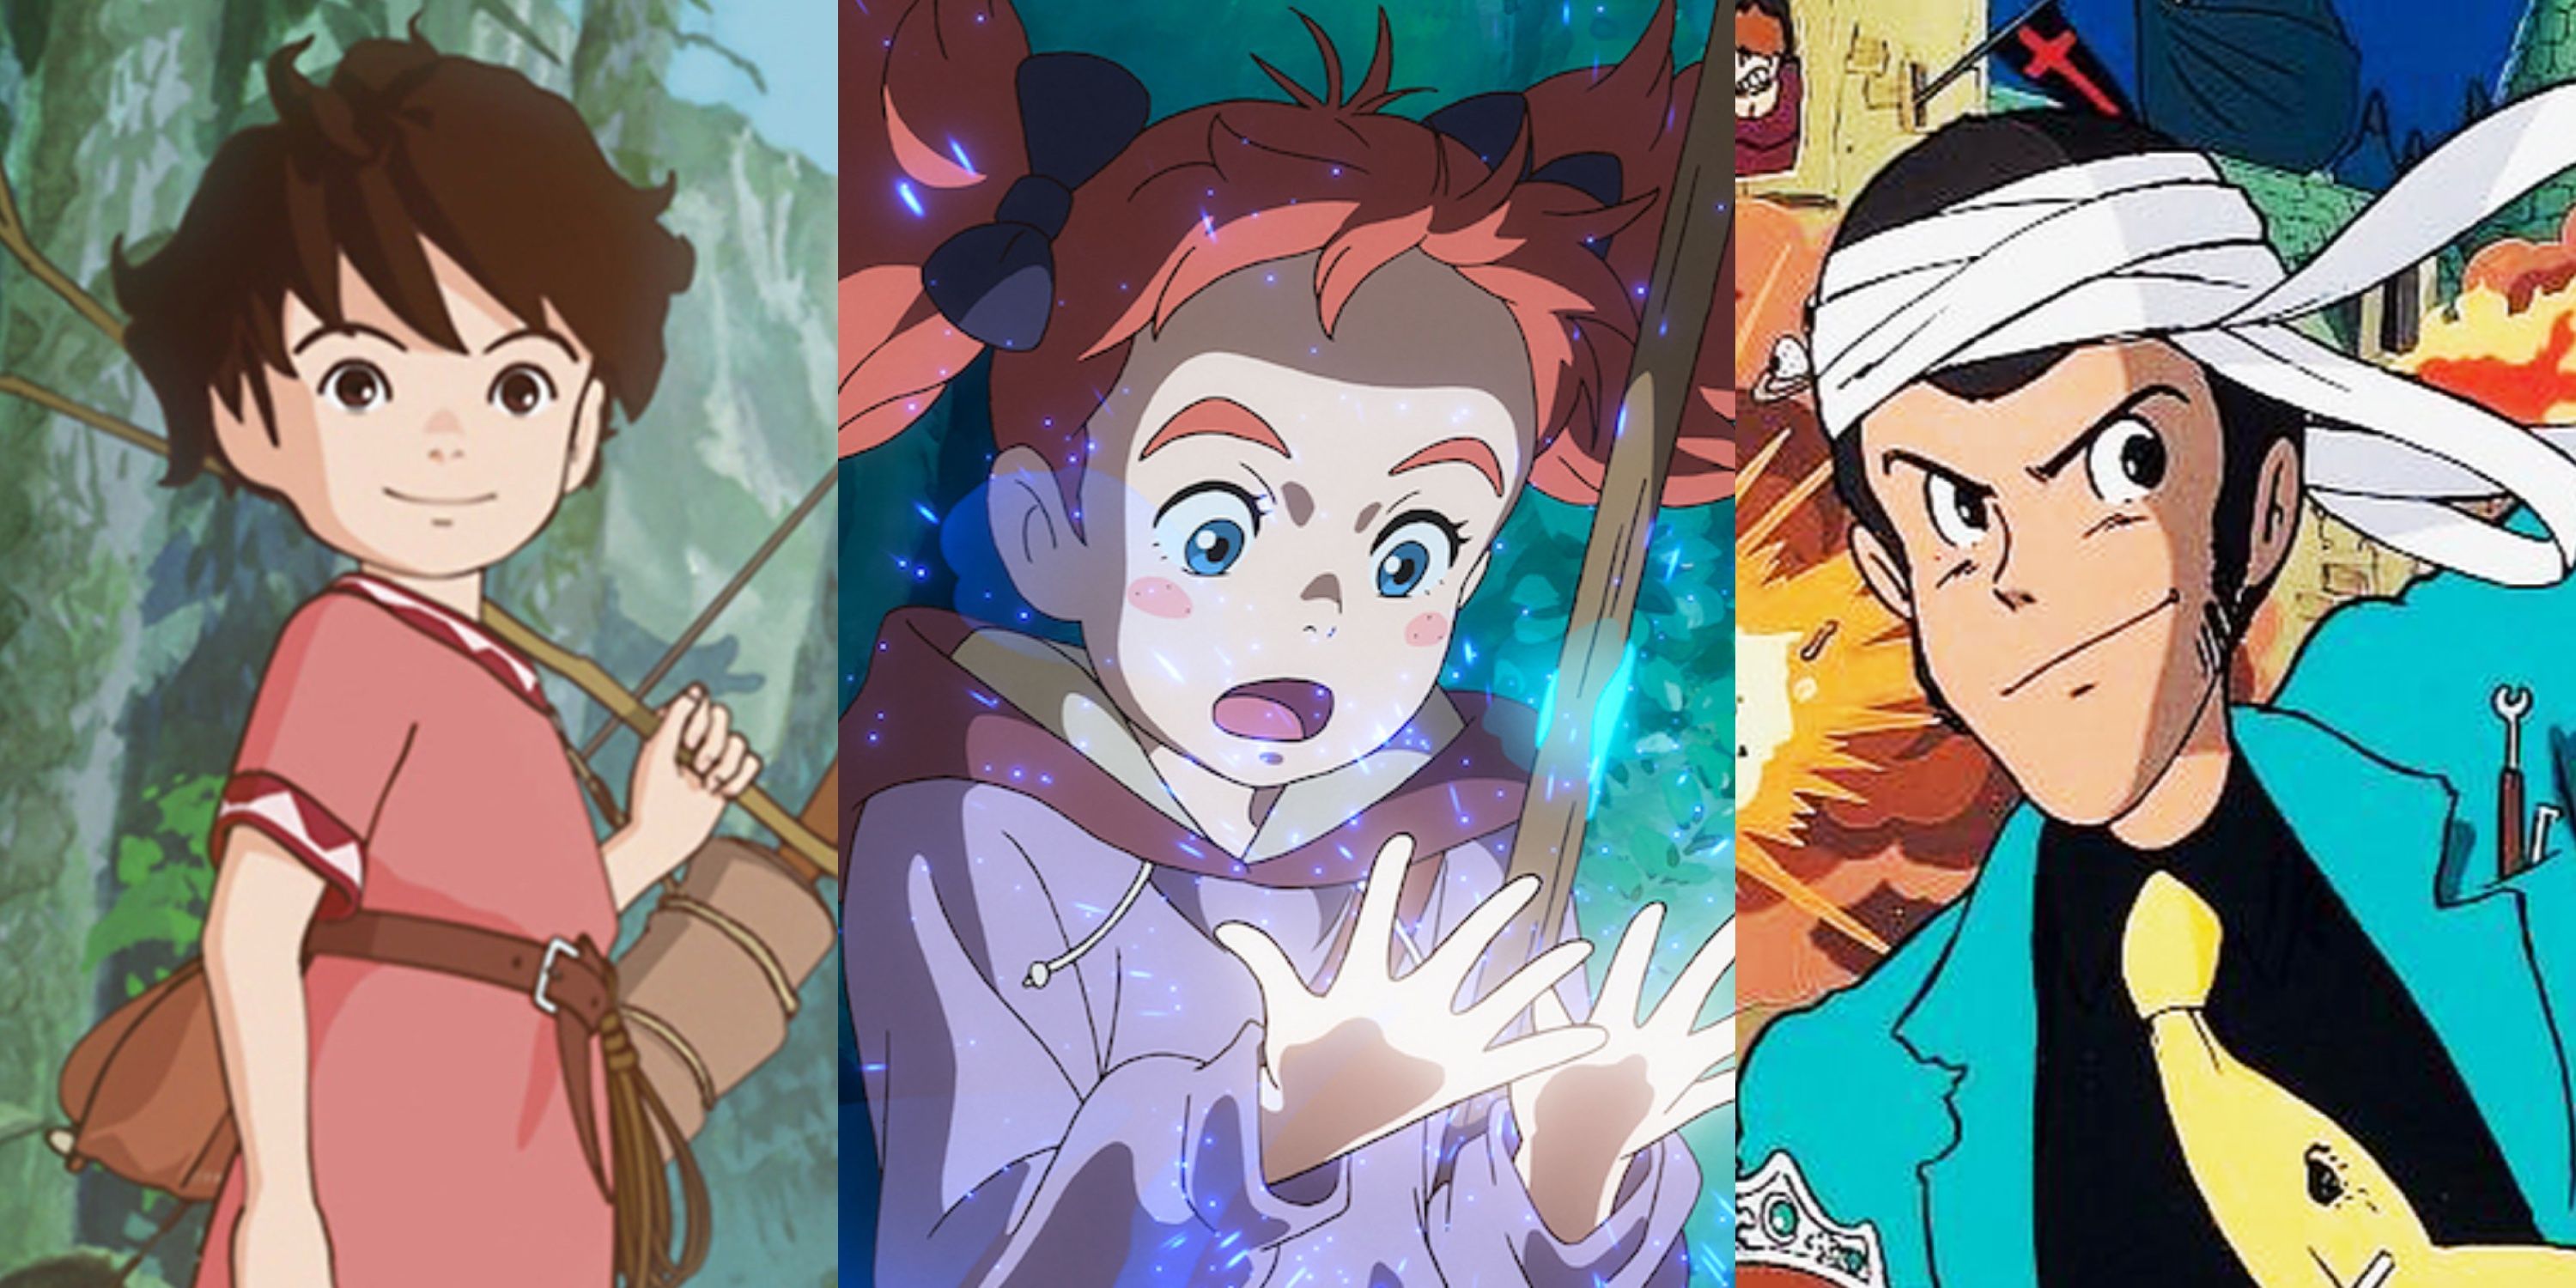 Split image of the main characters from Ronja, The Robber's Daughter, Mary and the Witch's Flower, Lupin III